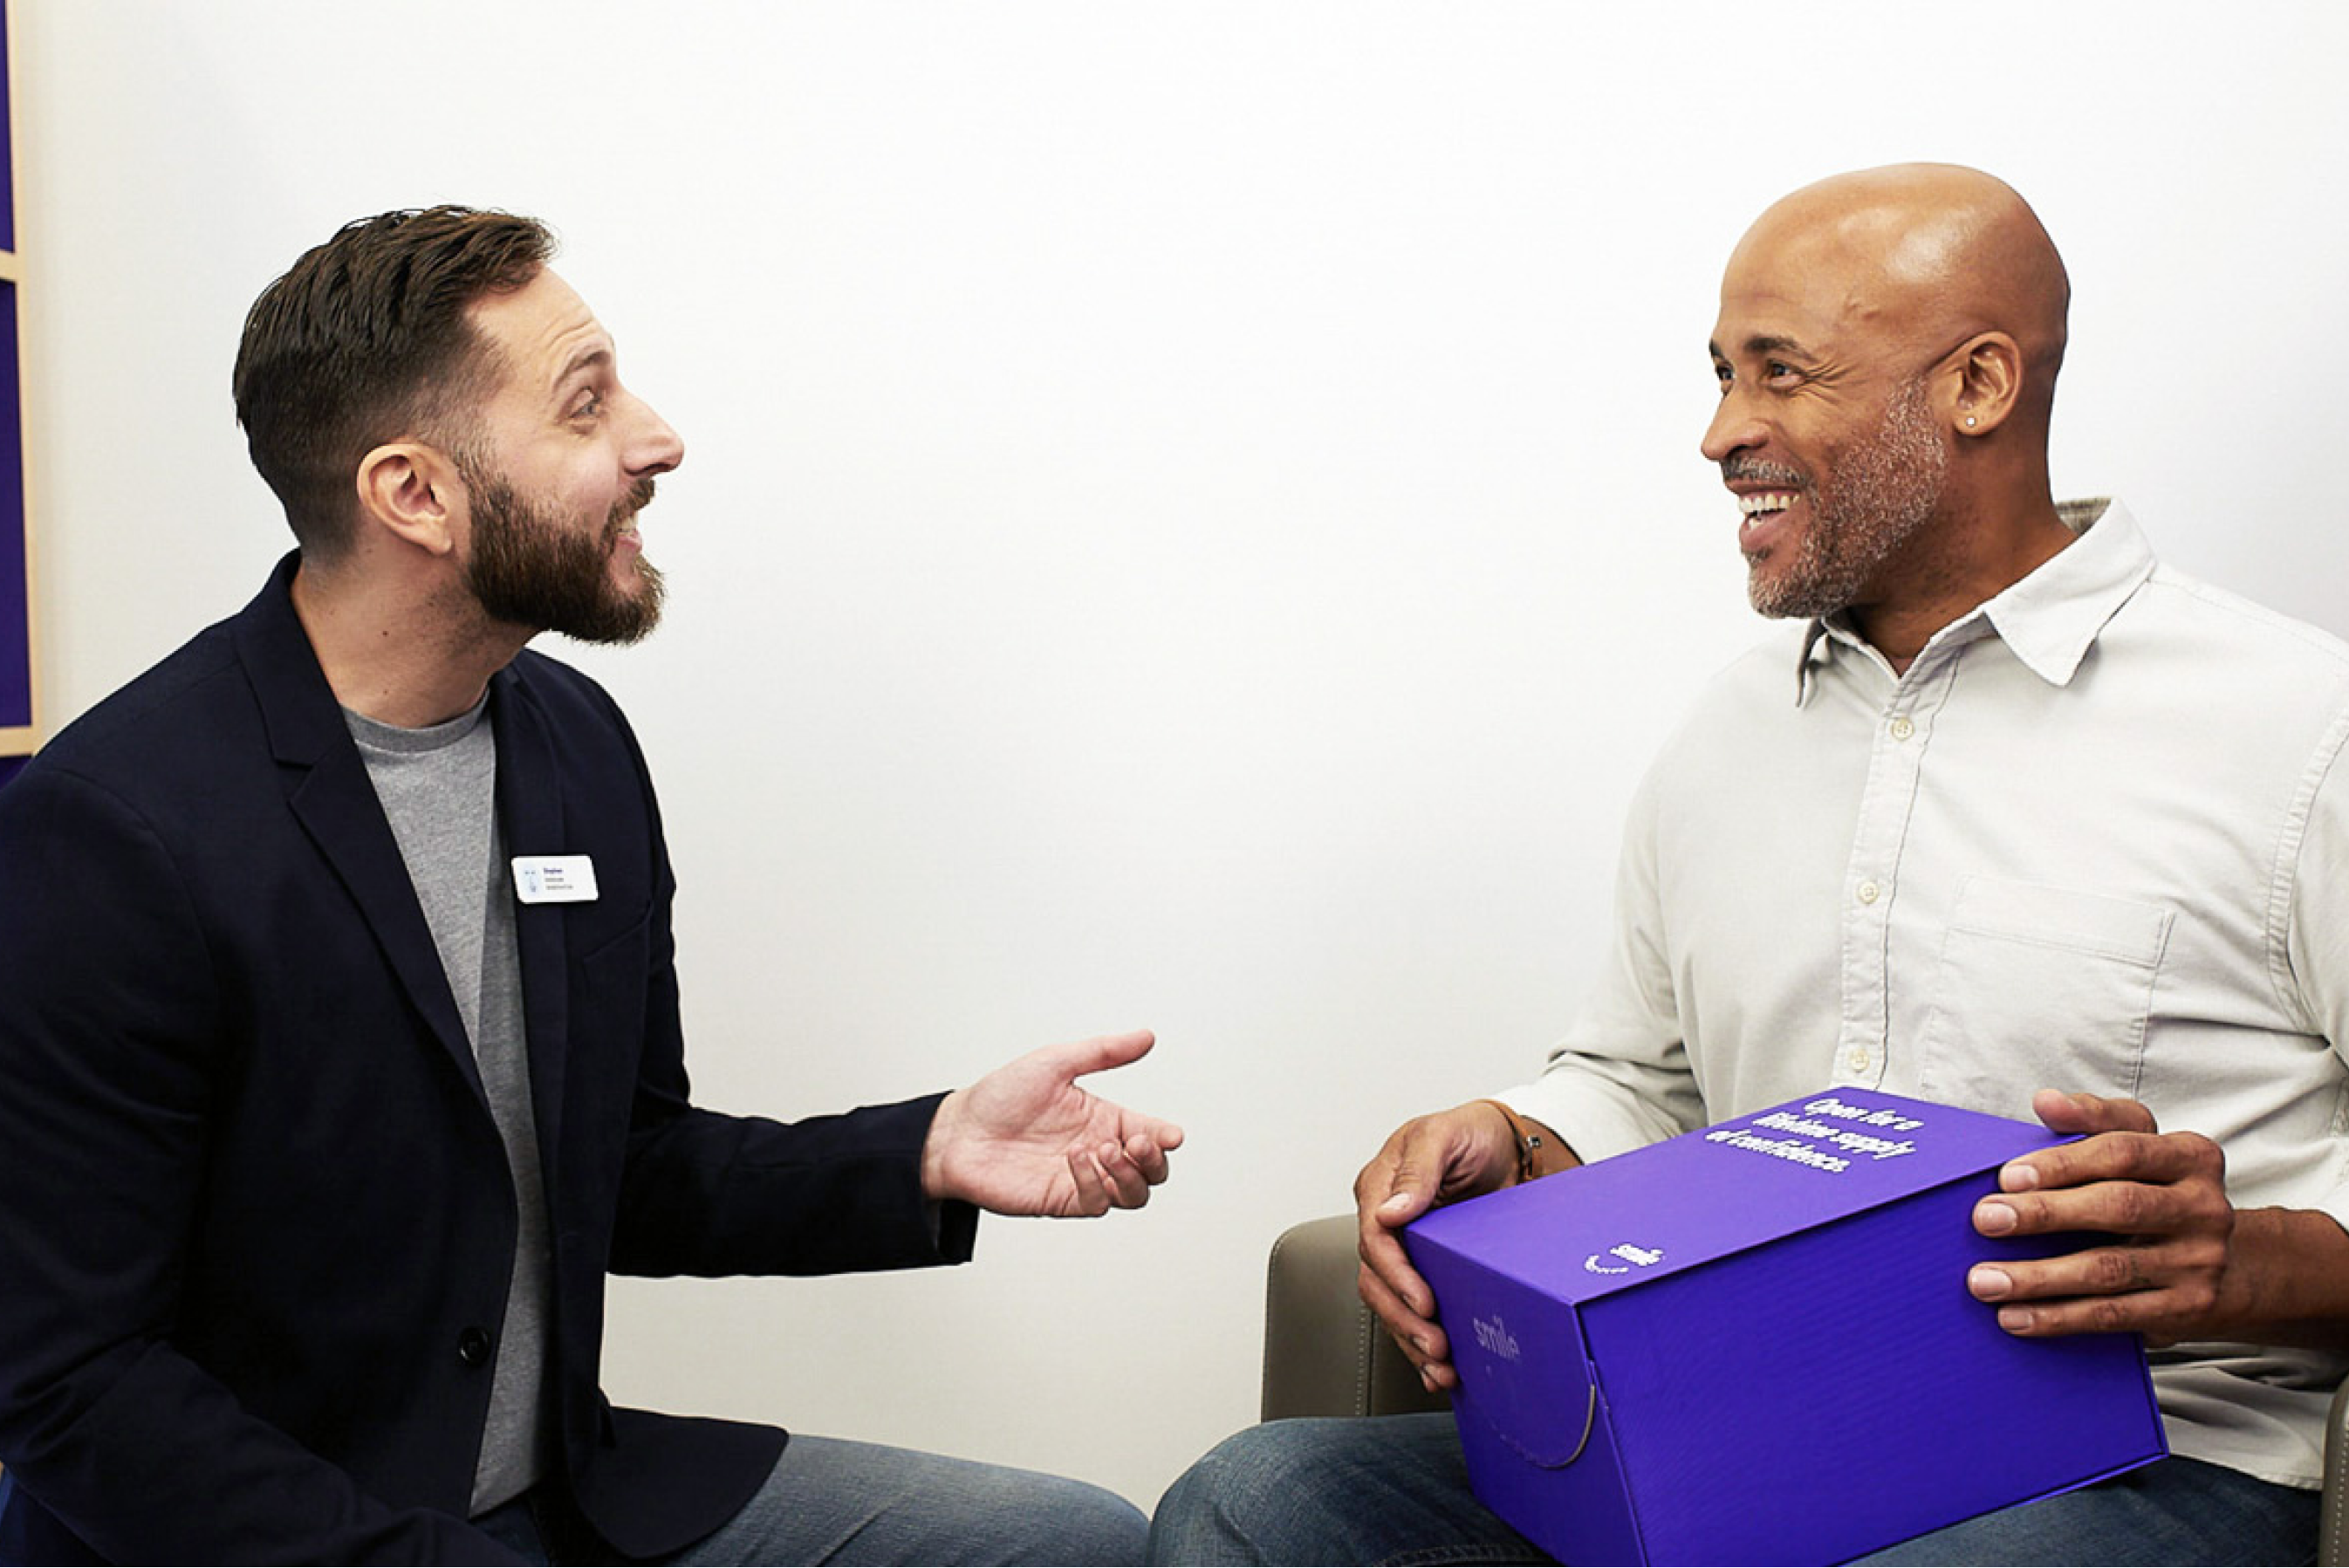 Man seated holding a Burple SmileDirectClub Aligner Box talking with SmileGuide at a Smileshop